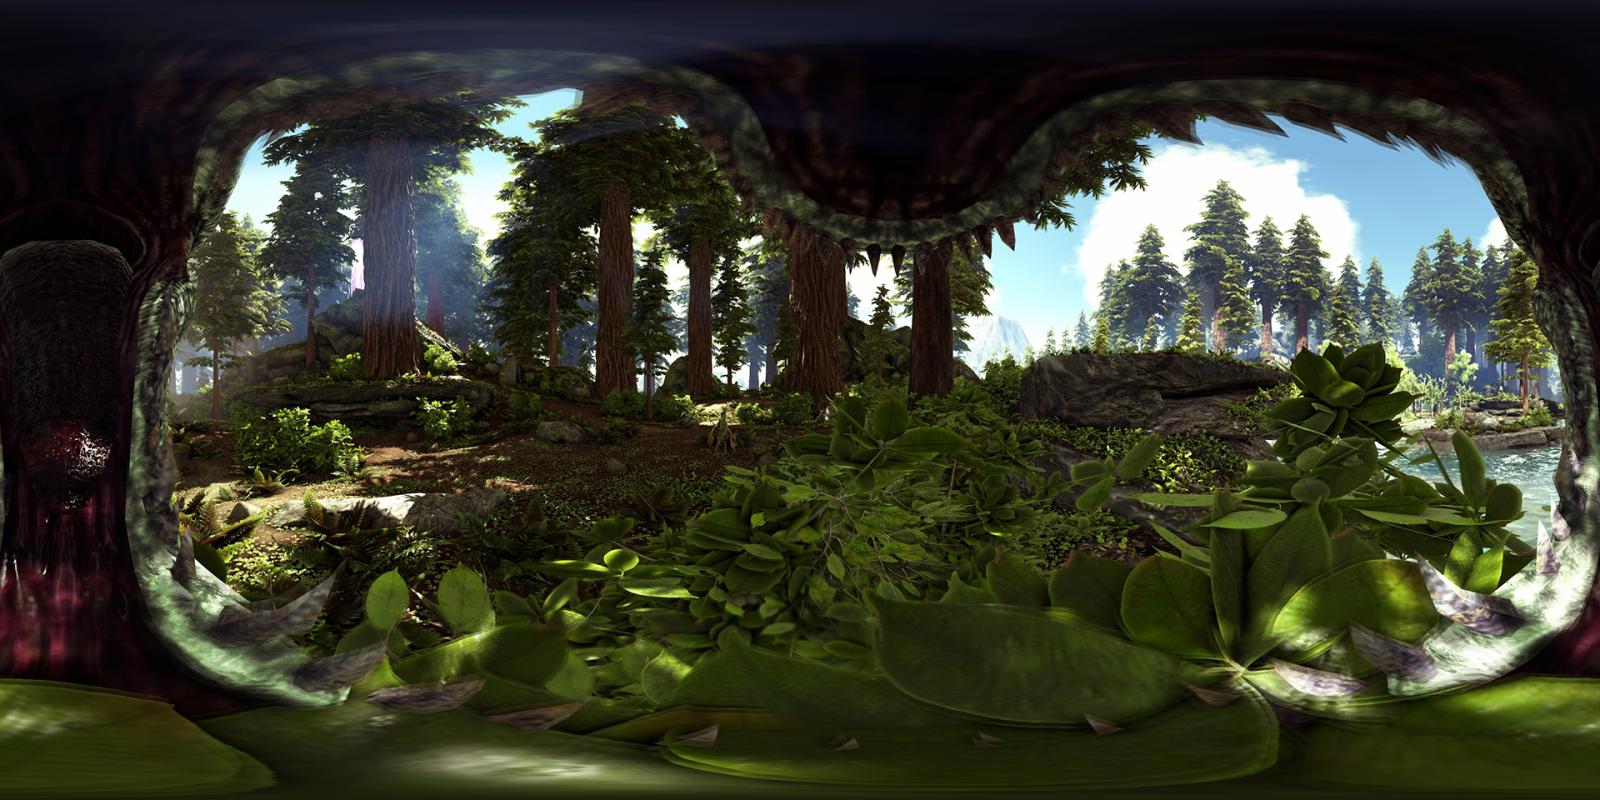 large.58cddf65346dc_FataL1ty-SpinosMaw-Panoramic360Stereoscopic3D.jpg